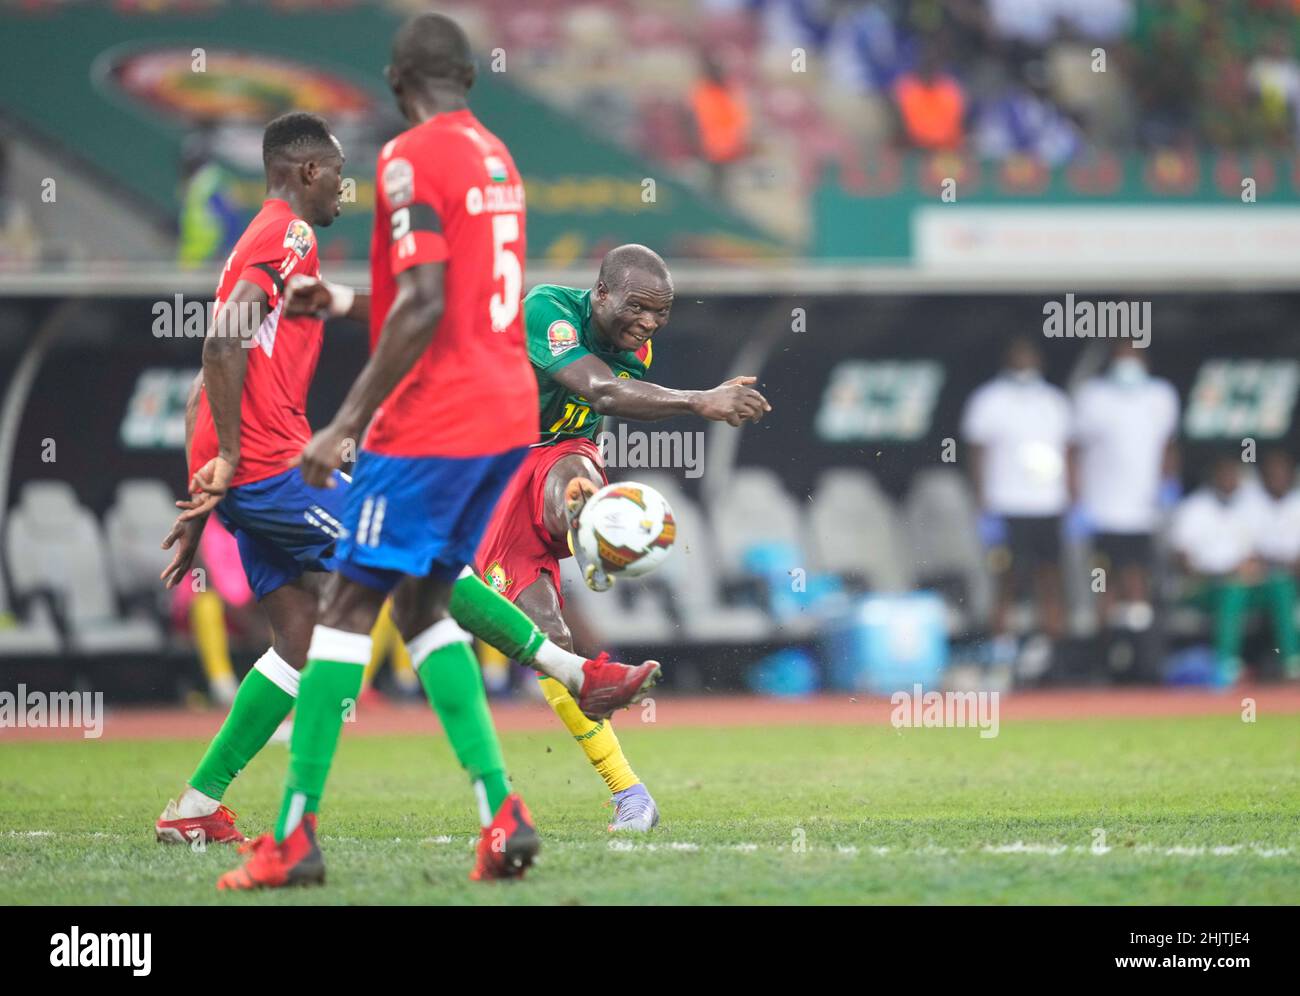 Douala, Cameroon, January, 29, 2022: Vincent Aboubakar of Cameroon during Cameroon versus The Gambia, Africa Cup of Nations at Japoma stadium. Kim Price/CSM. Stock Photo